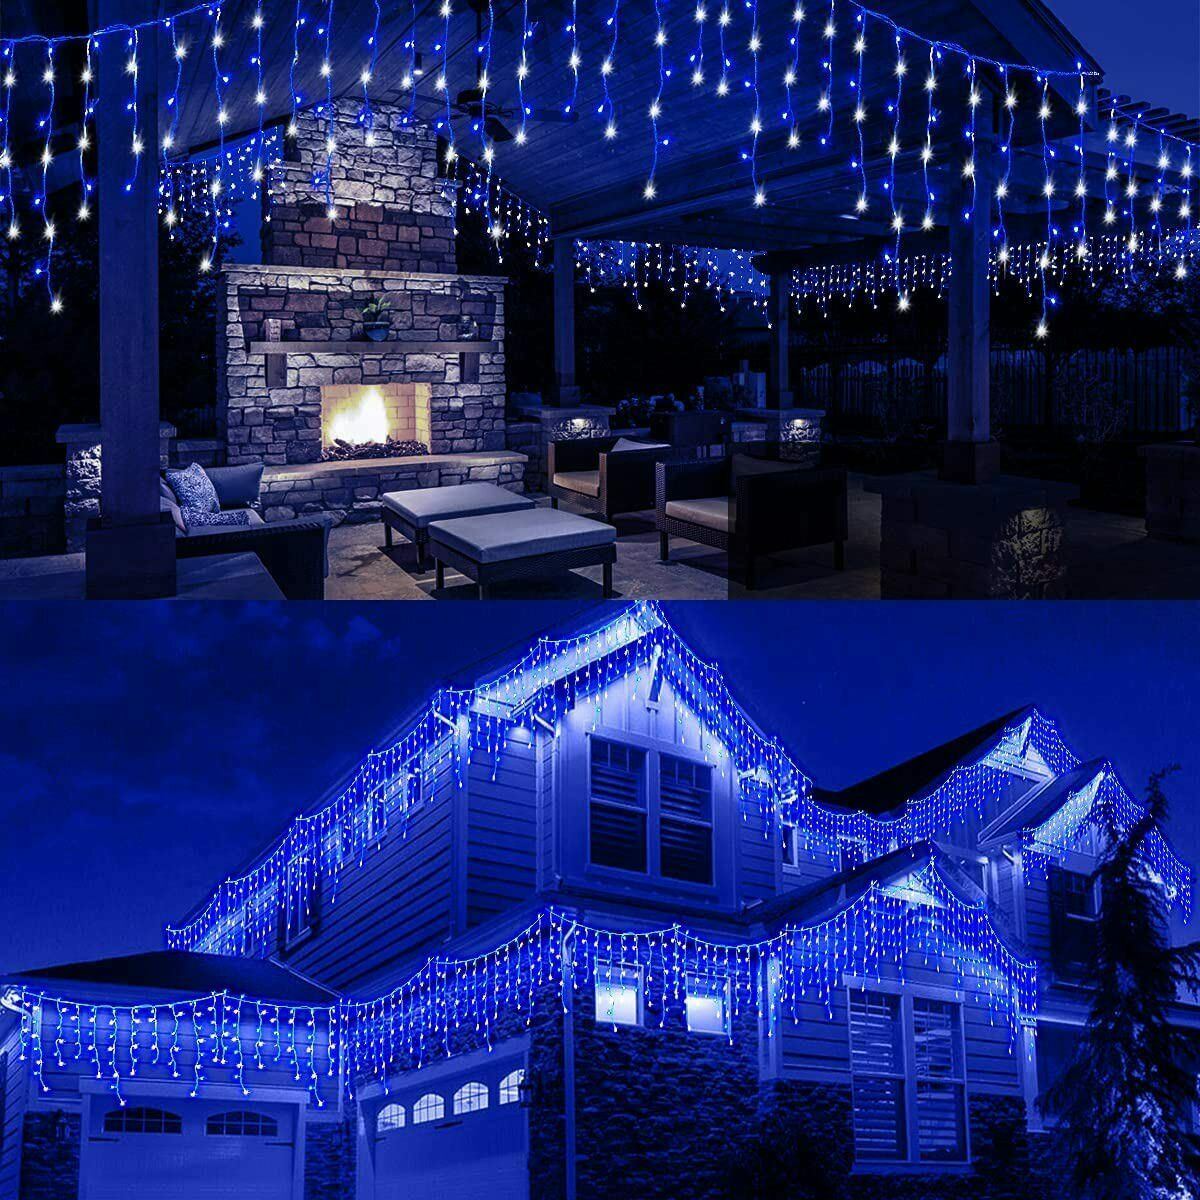 13FT 96LED Icicle String Light w/19 Drops Indoor/Outdoor Xmas Light Party Decor